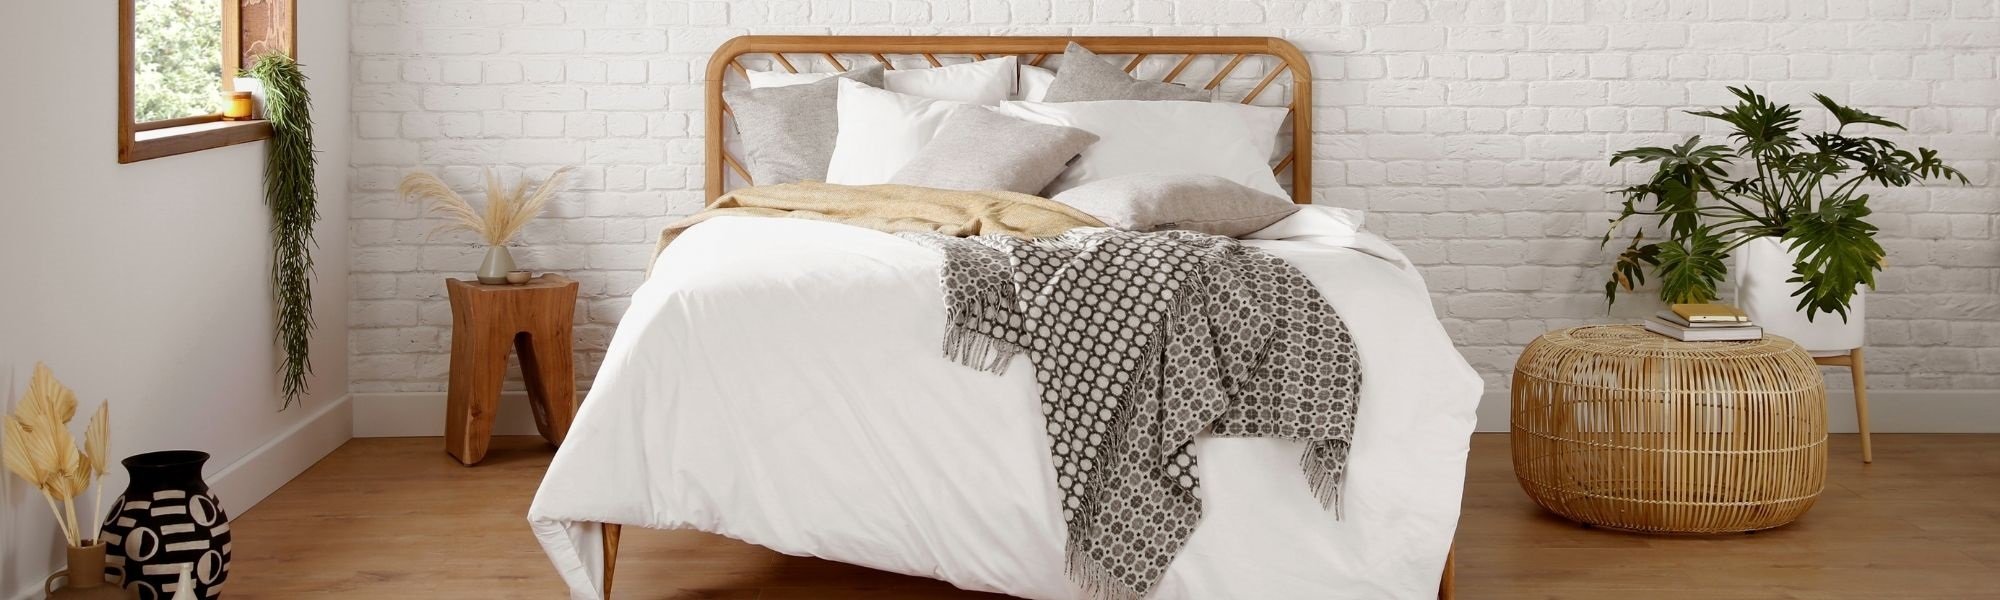 Bed Cover Buying Guide, Bedspreads & Quilts